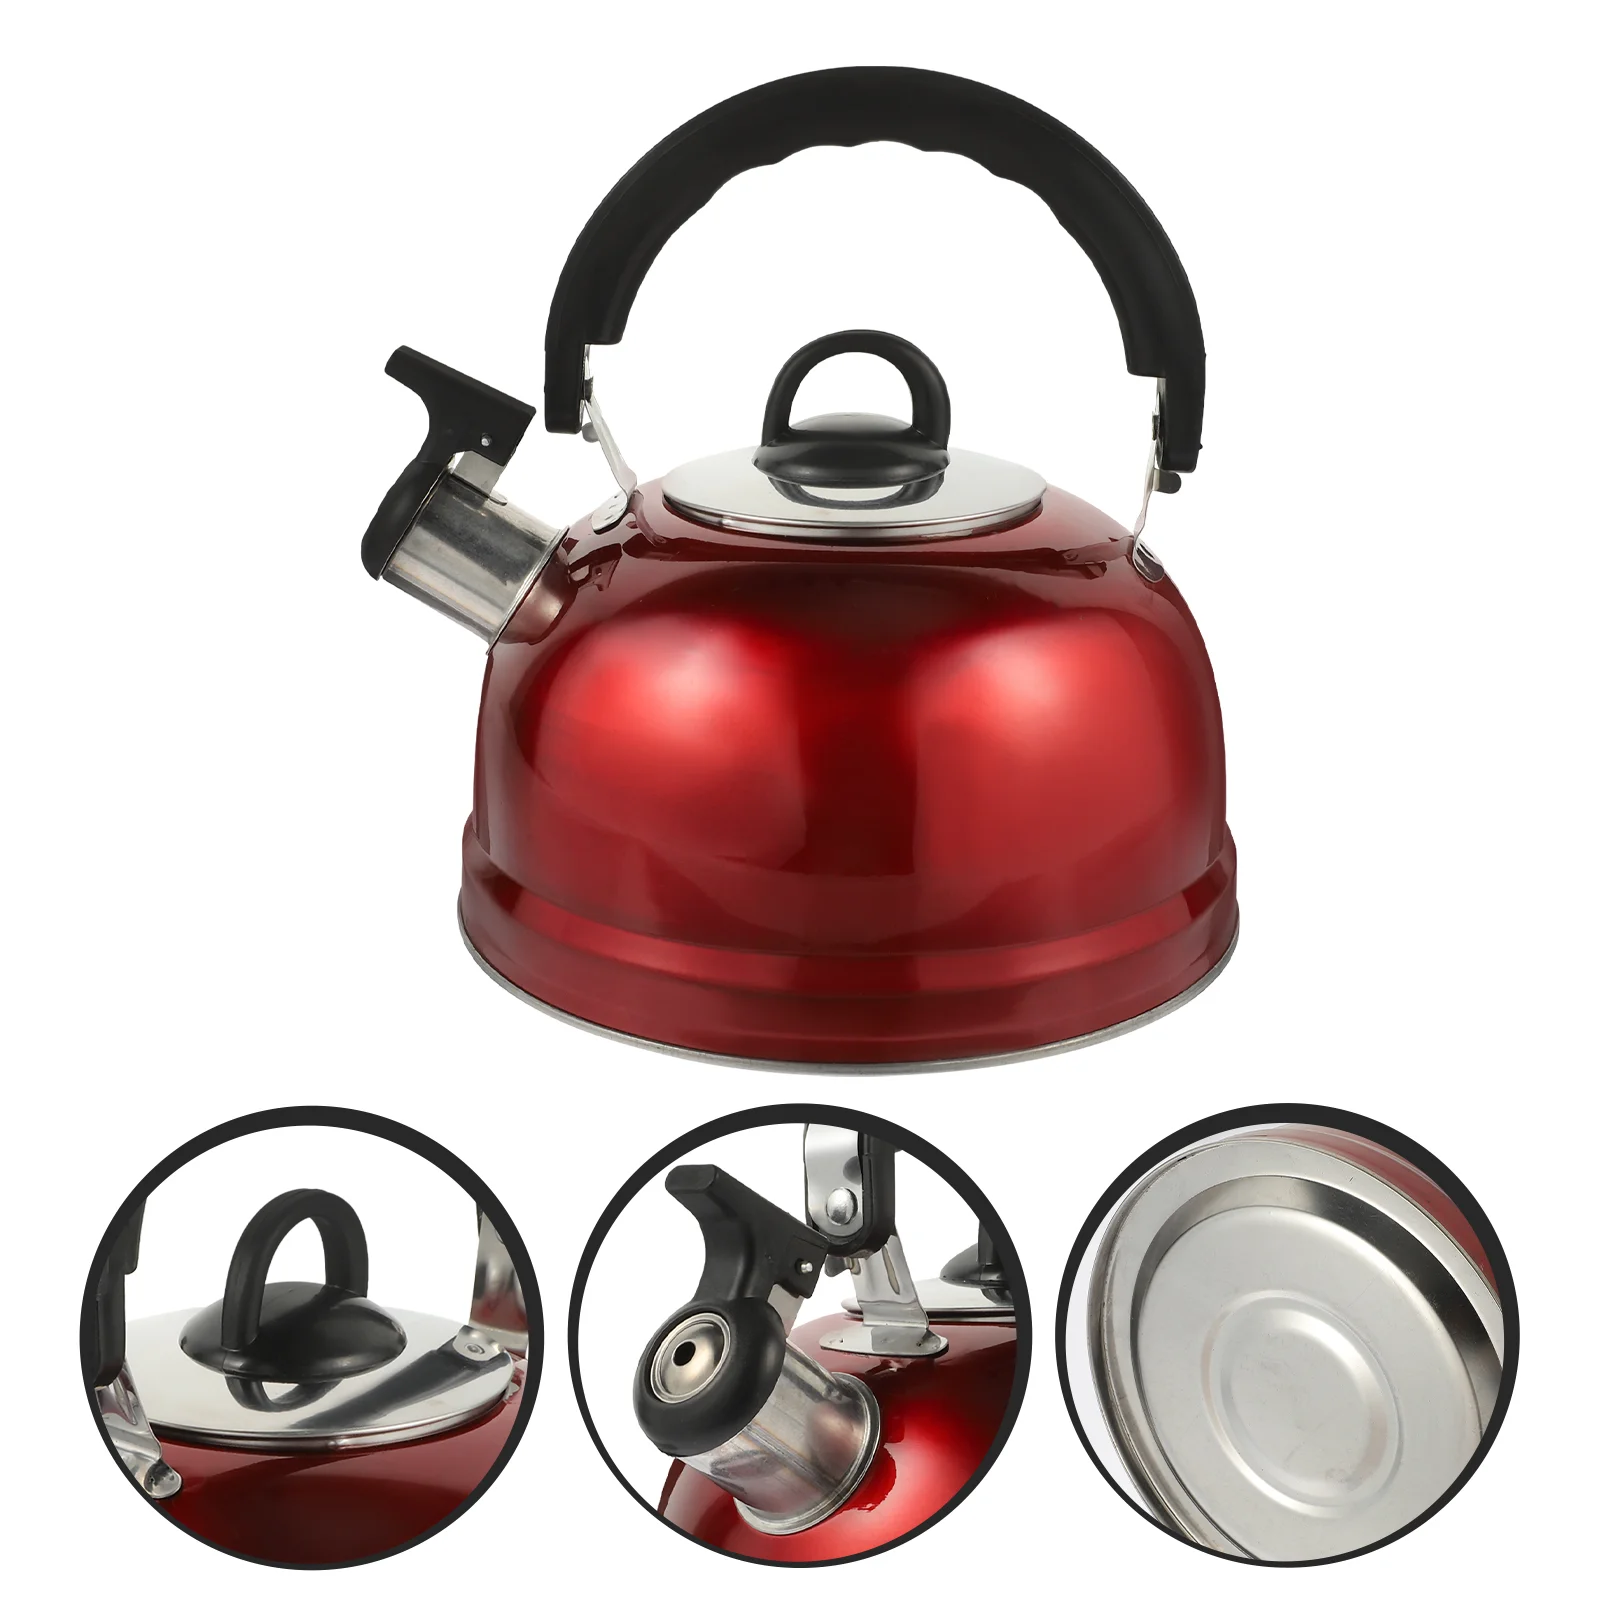 

Buzzing Kettle Sounding Stainless Steel Whistling Tea Water Camping Coffee Pot Stove Top Household Maker Gas Food Grade